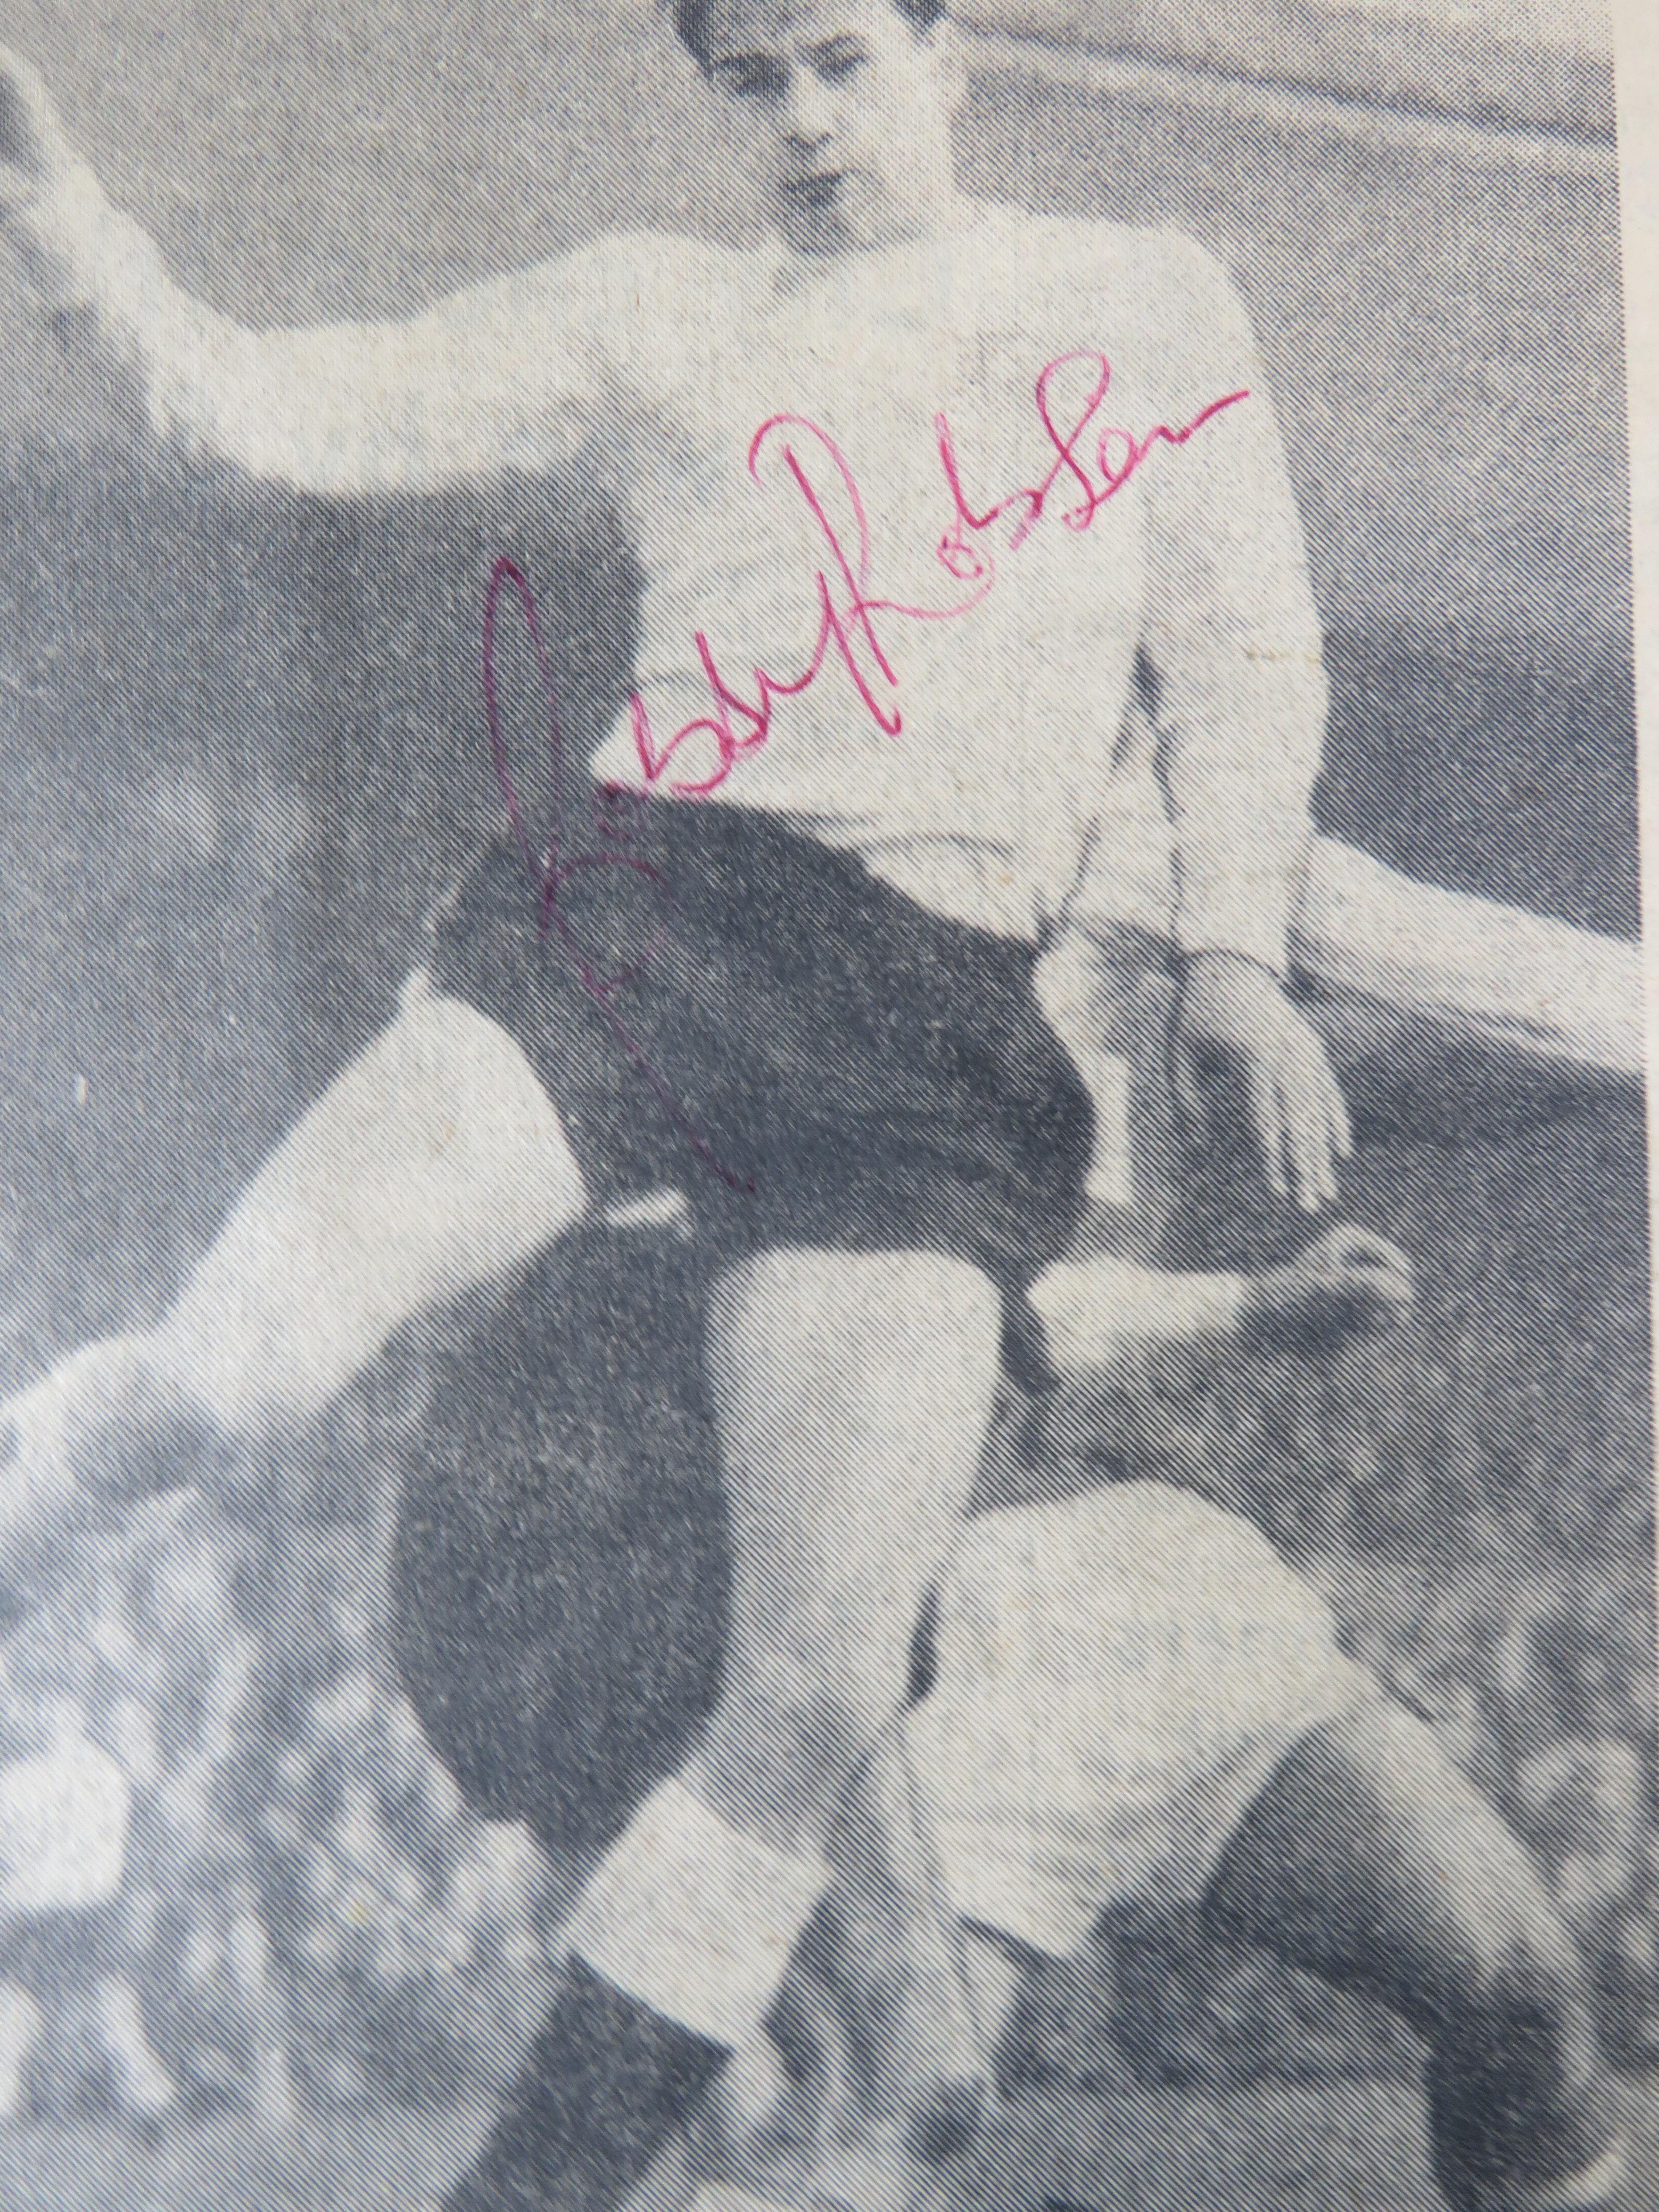 Sporting Magazines dating from 1950's, Newcastle United Match day programme from 1966 plus autograph - Image 4 of 11